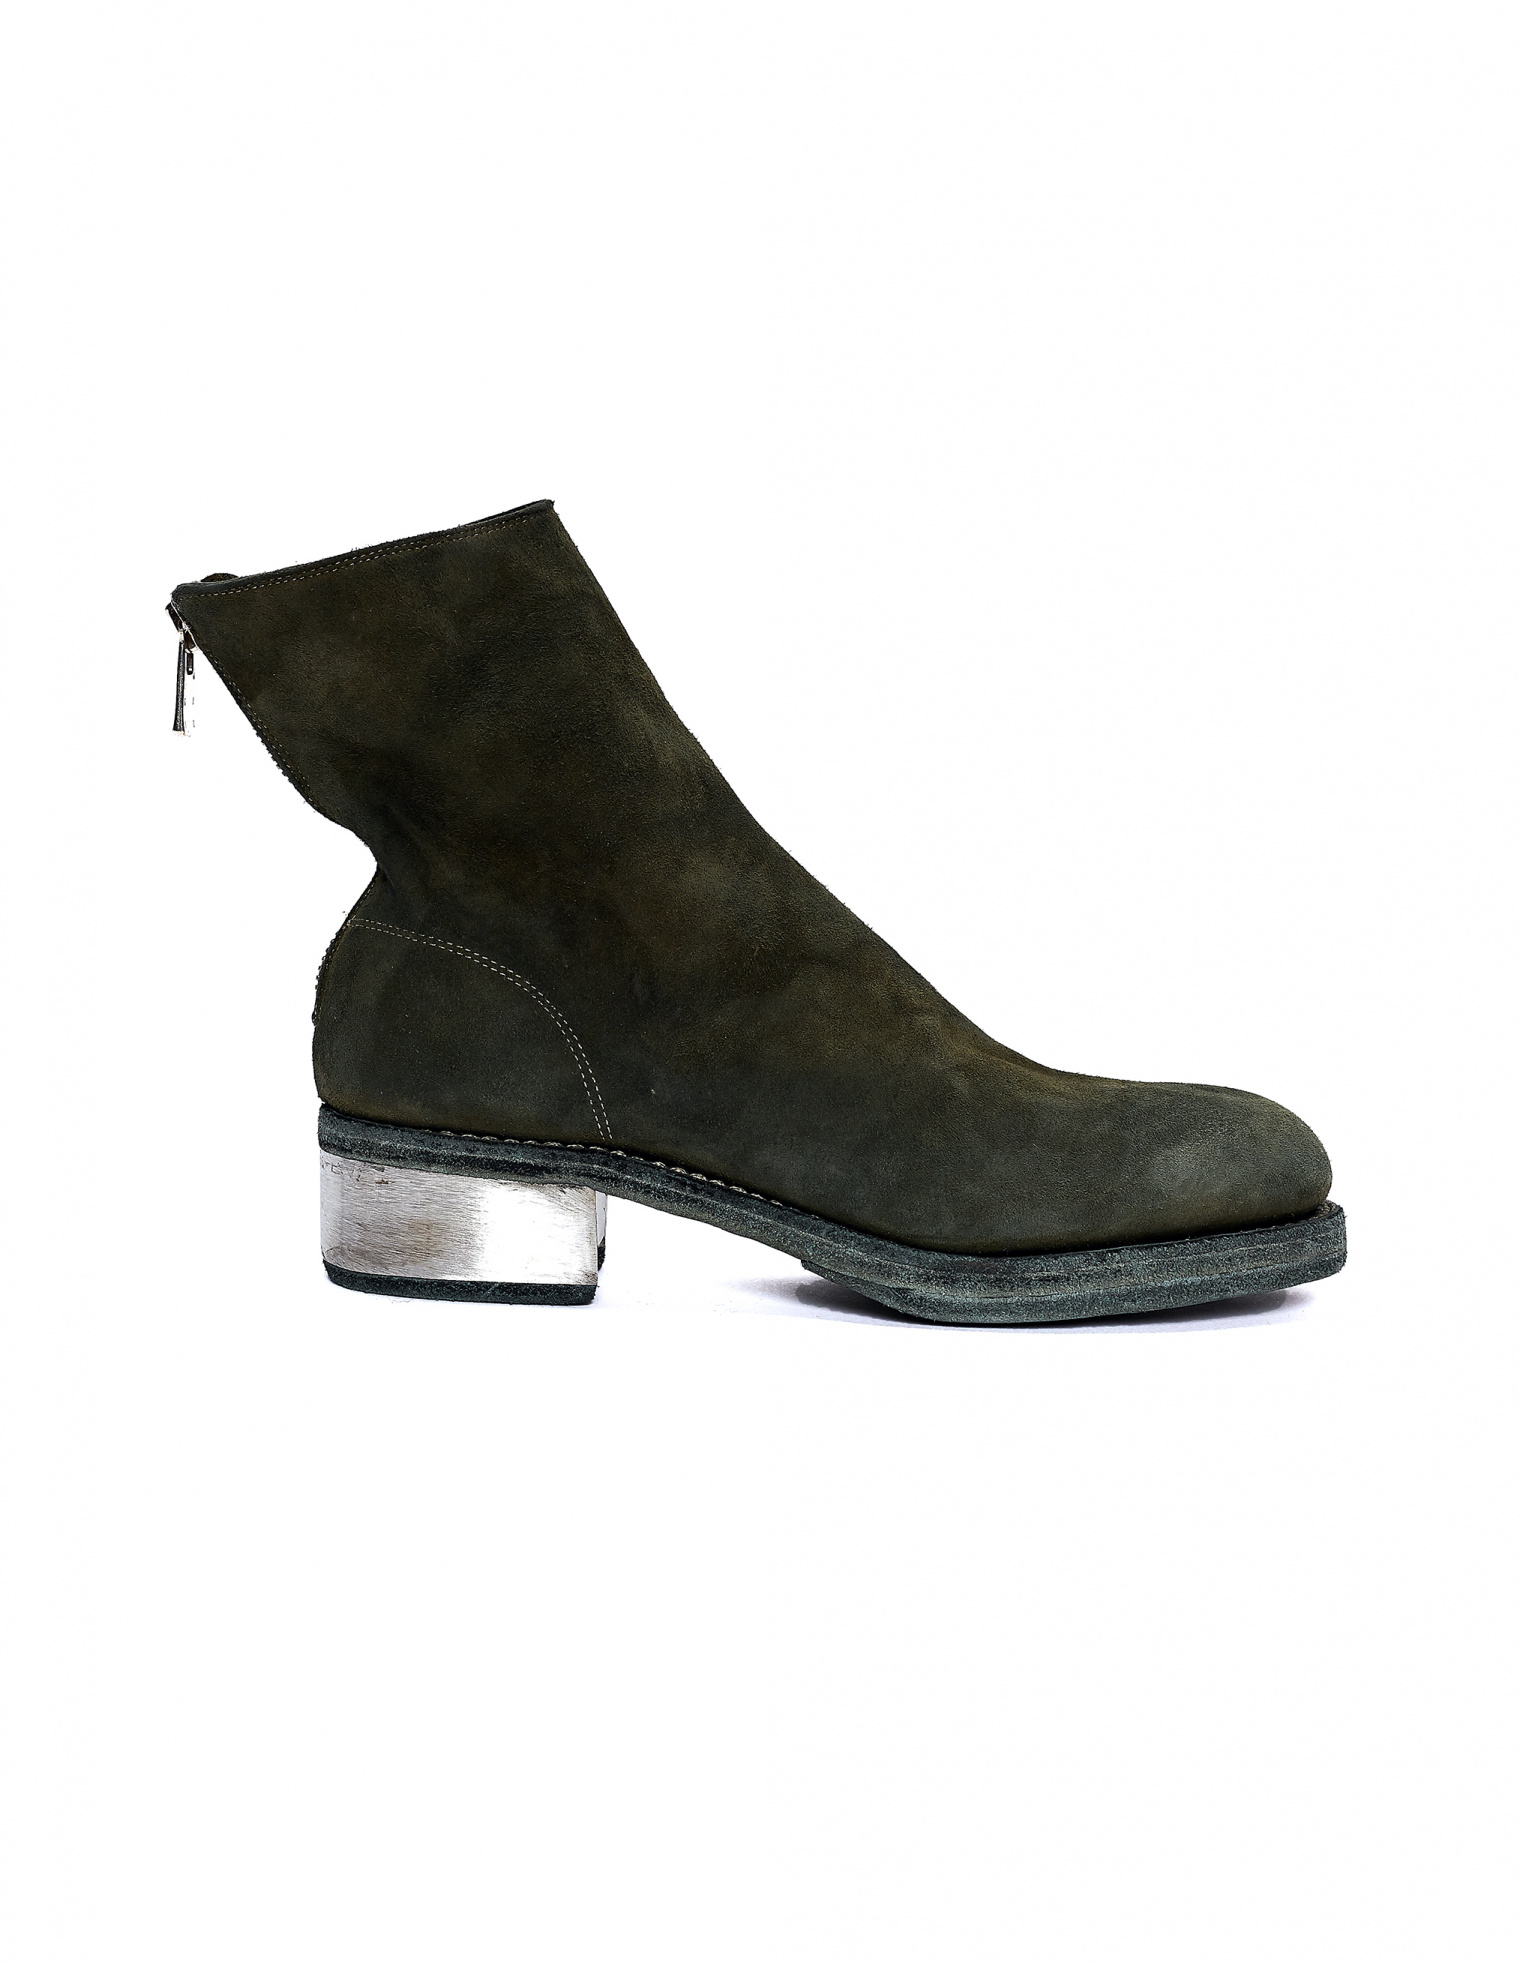 Guidi Suede Metallic Heel Ankle Boots